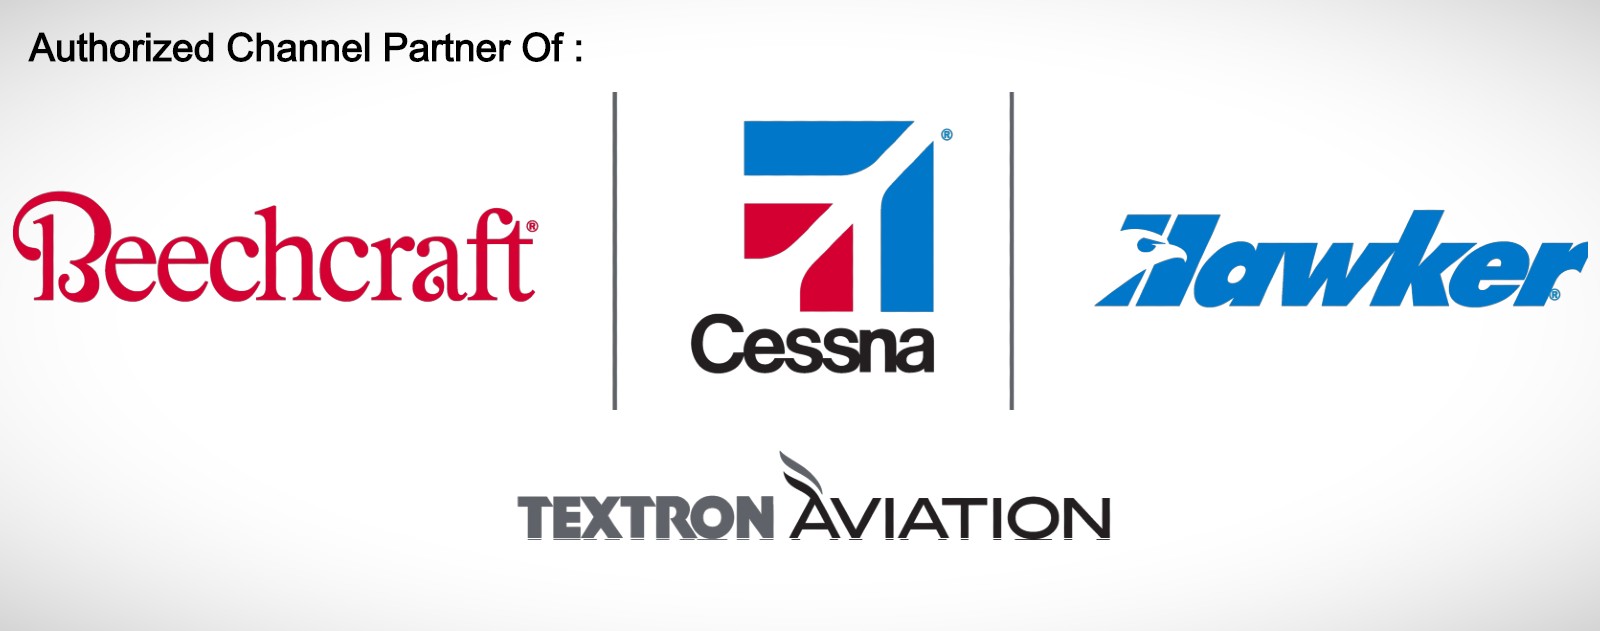 Authorized Channel Partner of Textron Aviation